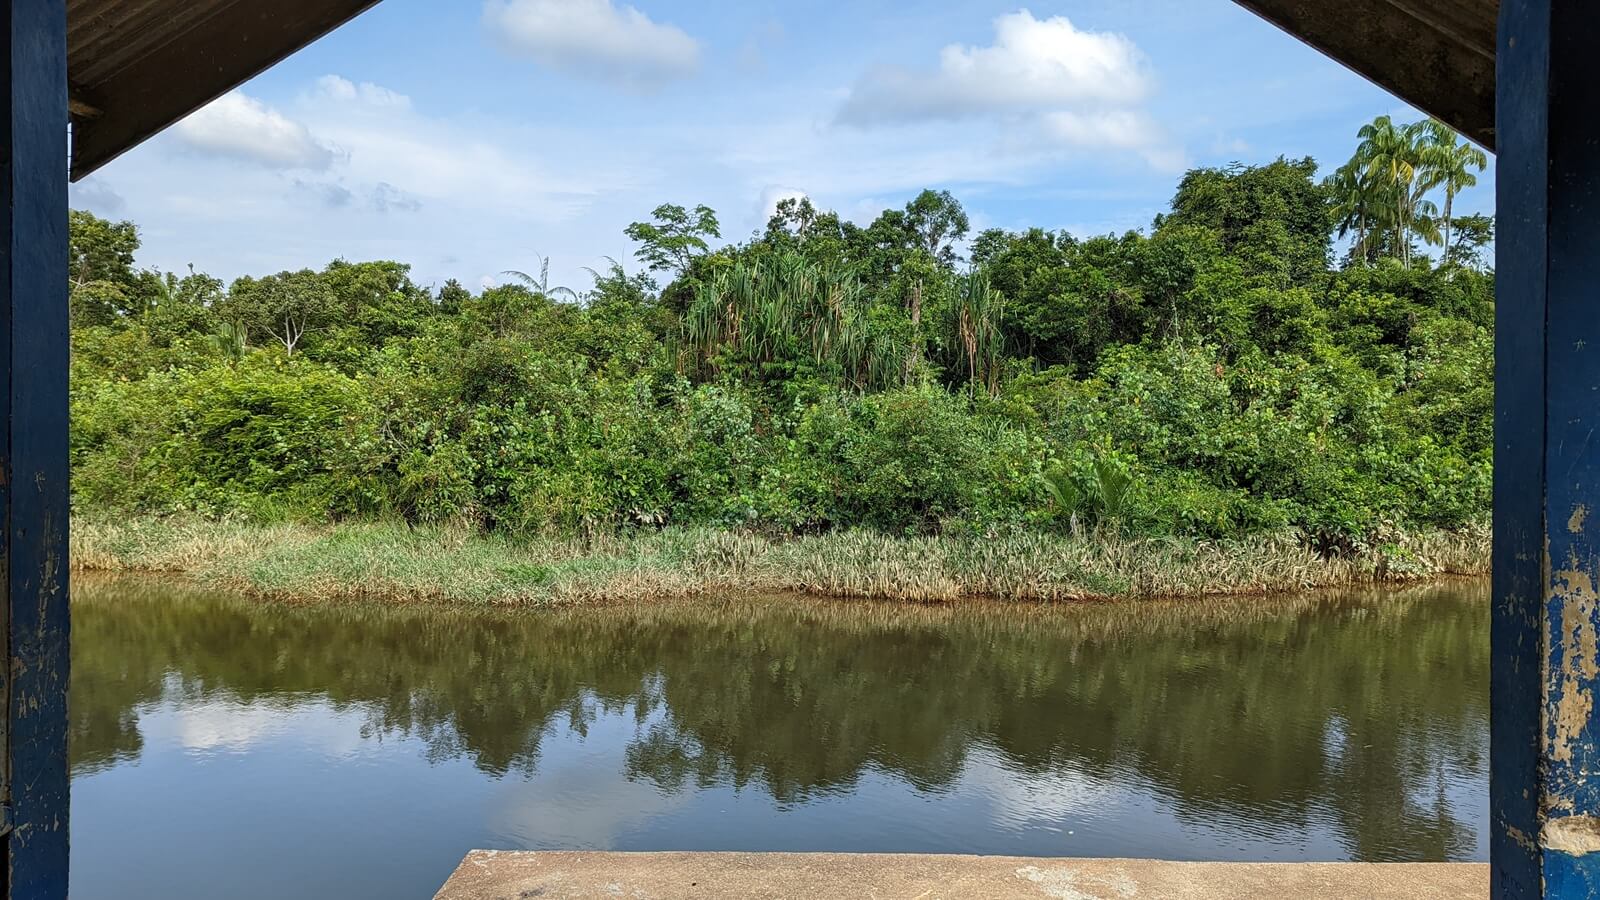 Looking across Sungai Labong from the jetty beside Ariffin’s house. Crocodiles live in the area, but locals are also worried about elephants crossing the river into their fields or villages. (YH Law)